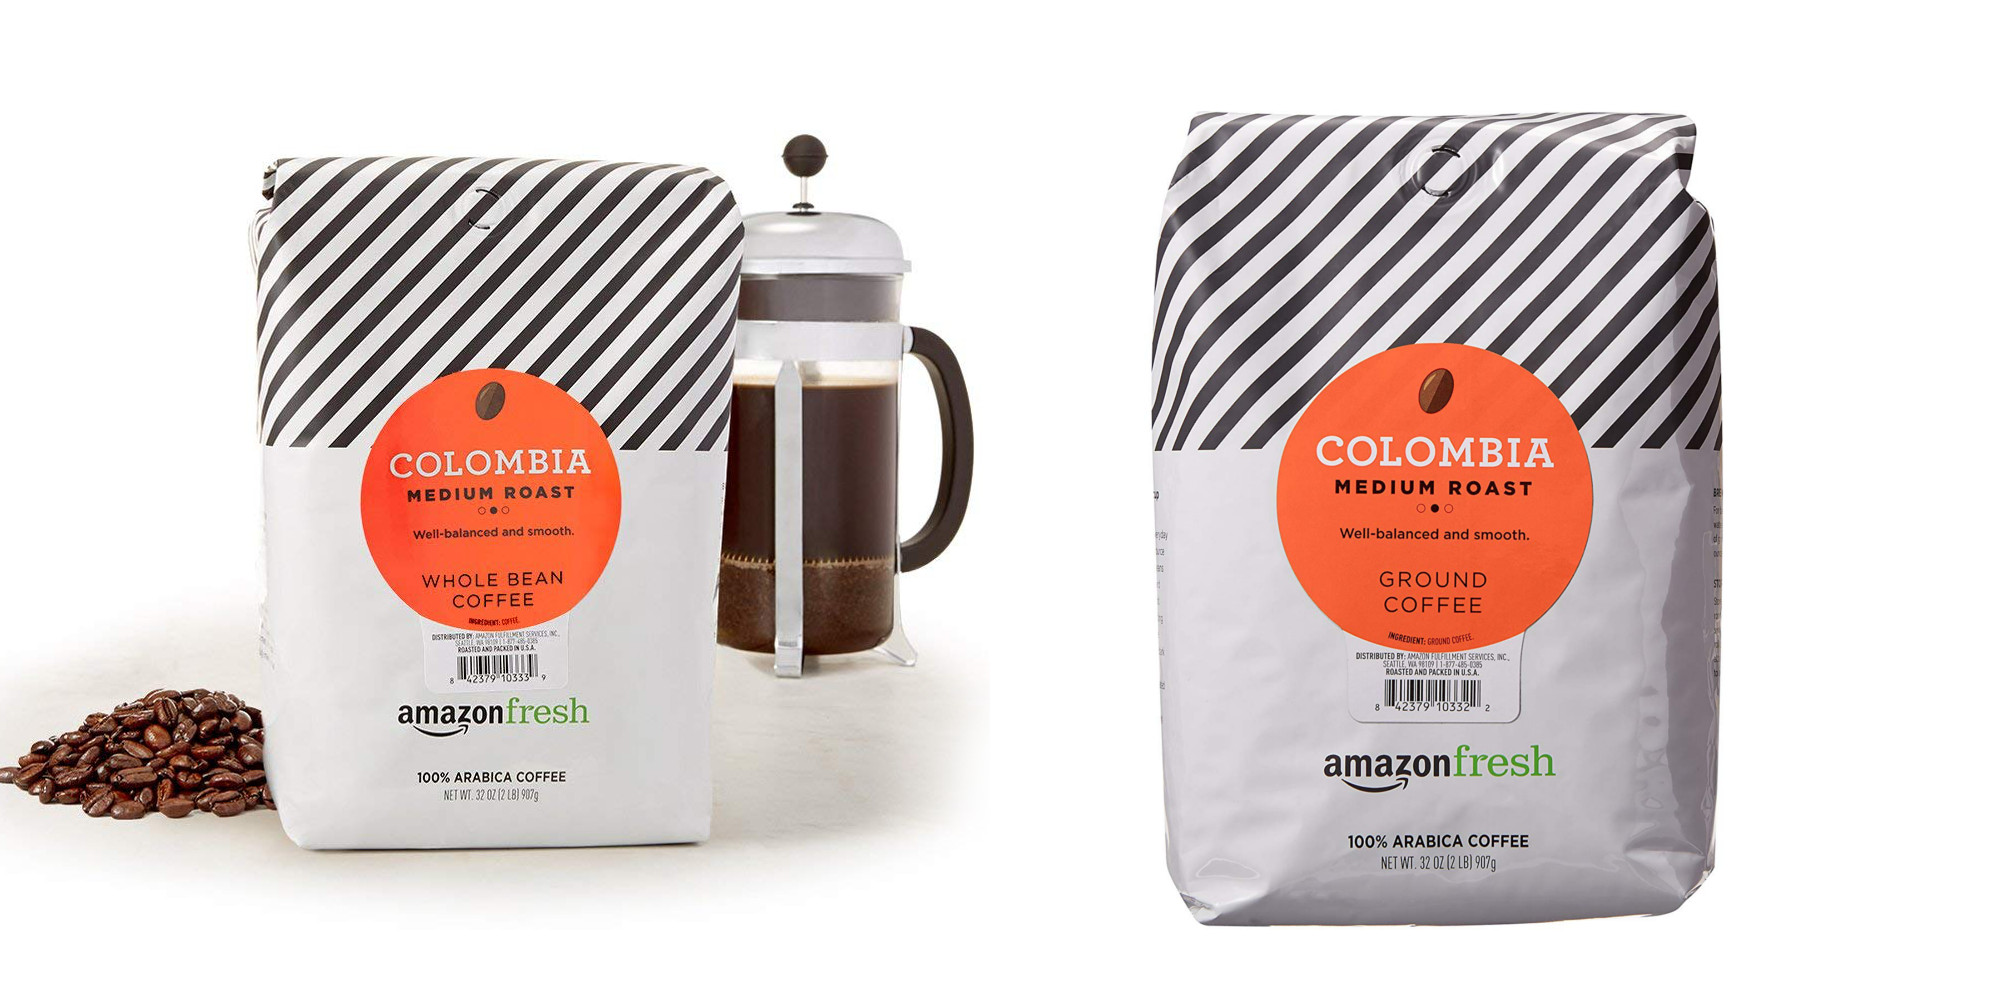 Try out the AmazonFresh Coffee at 30 off 32 oz. for 10